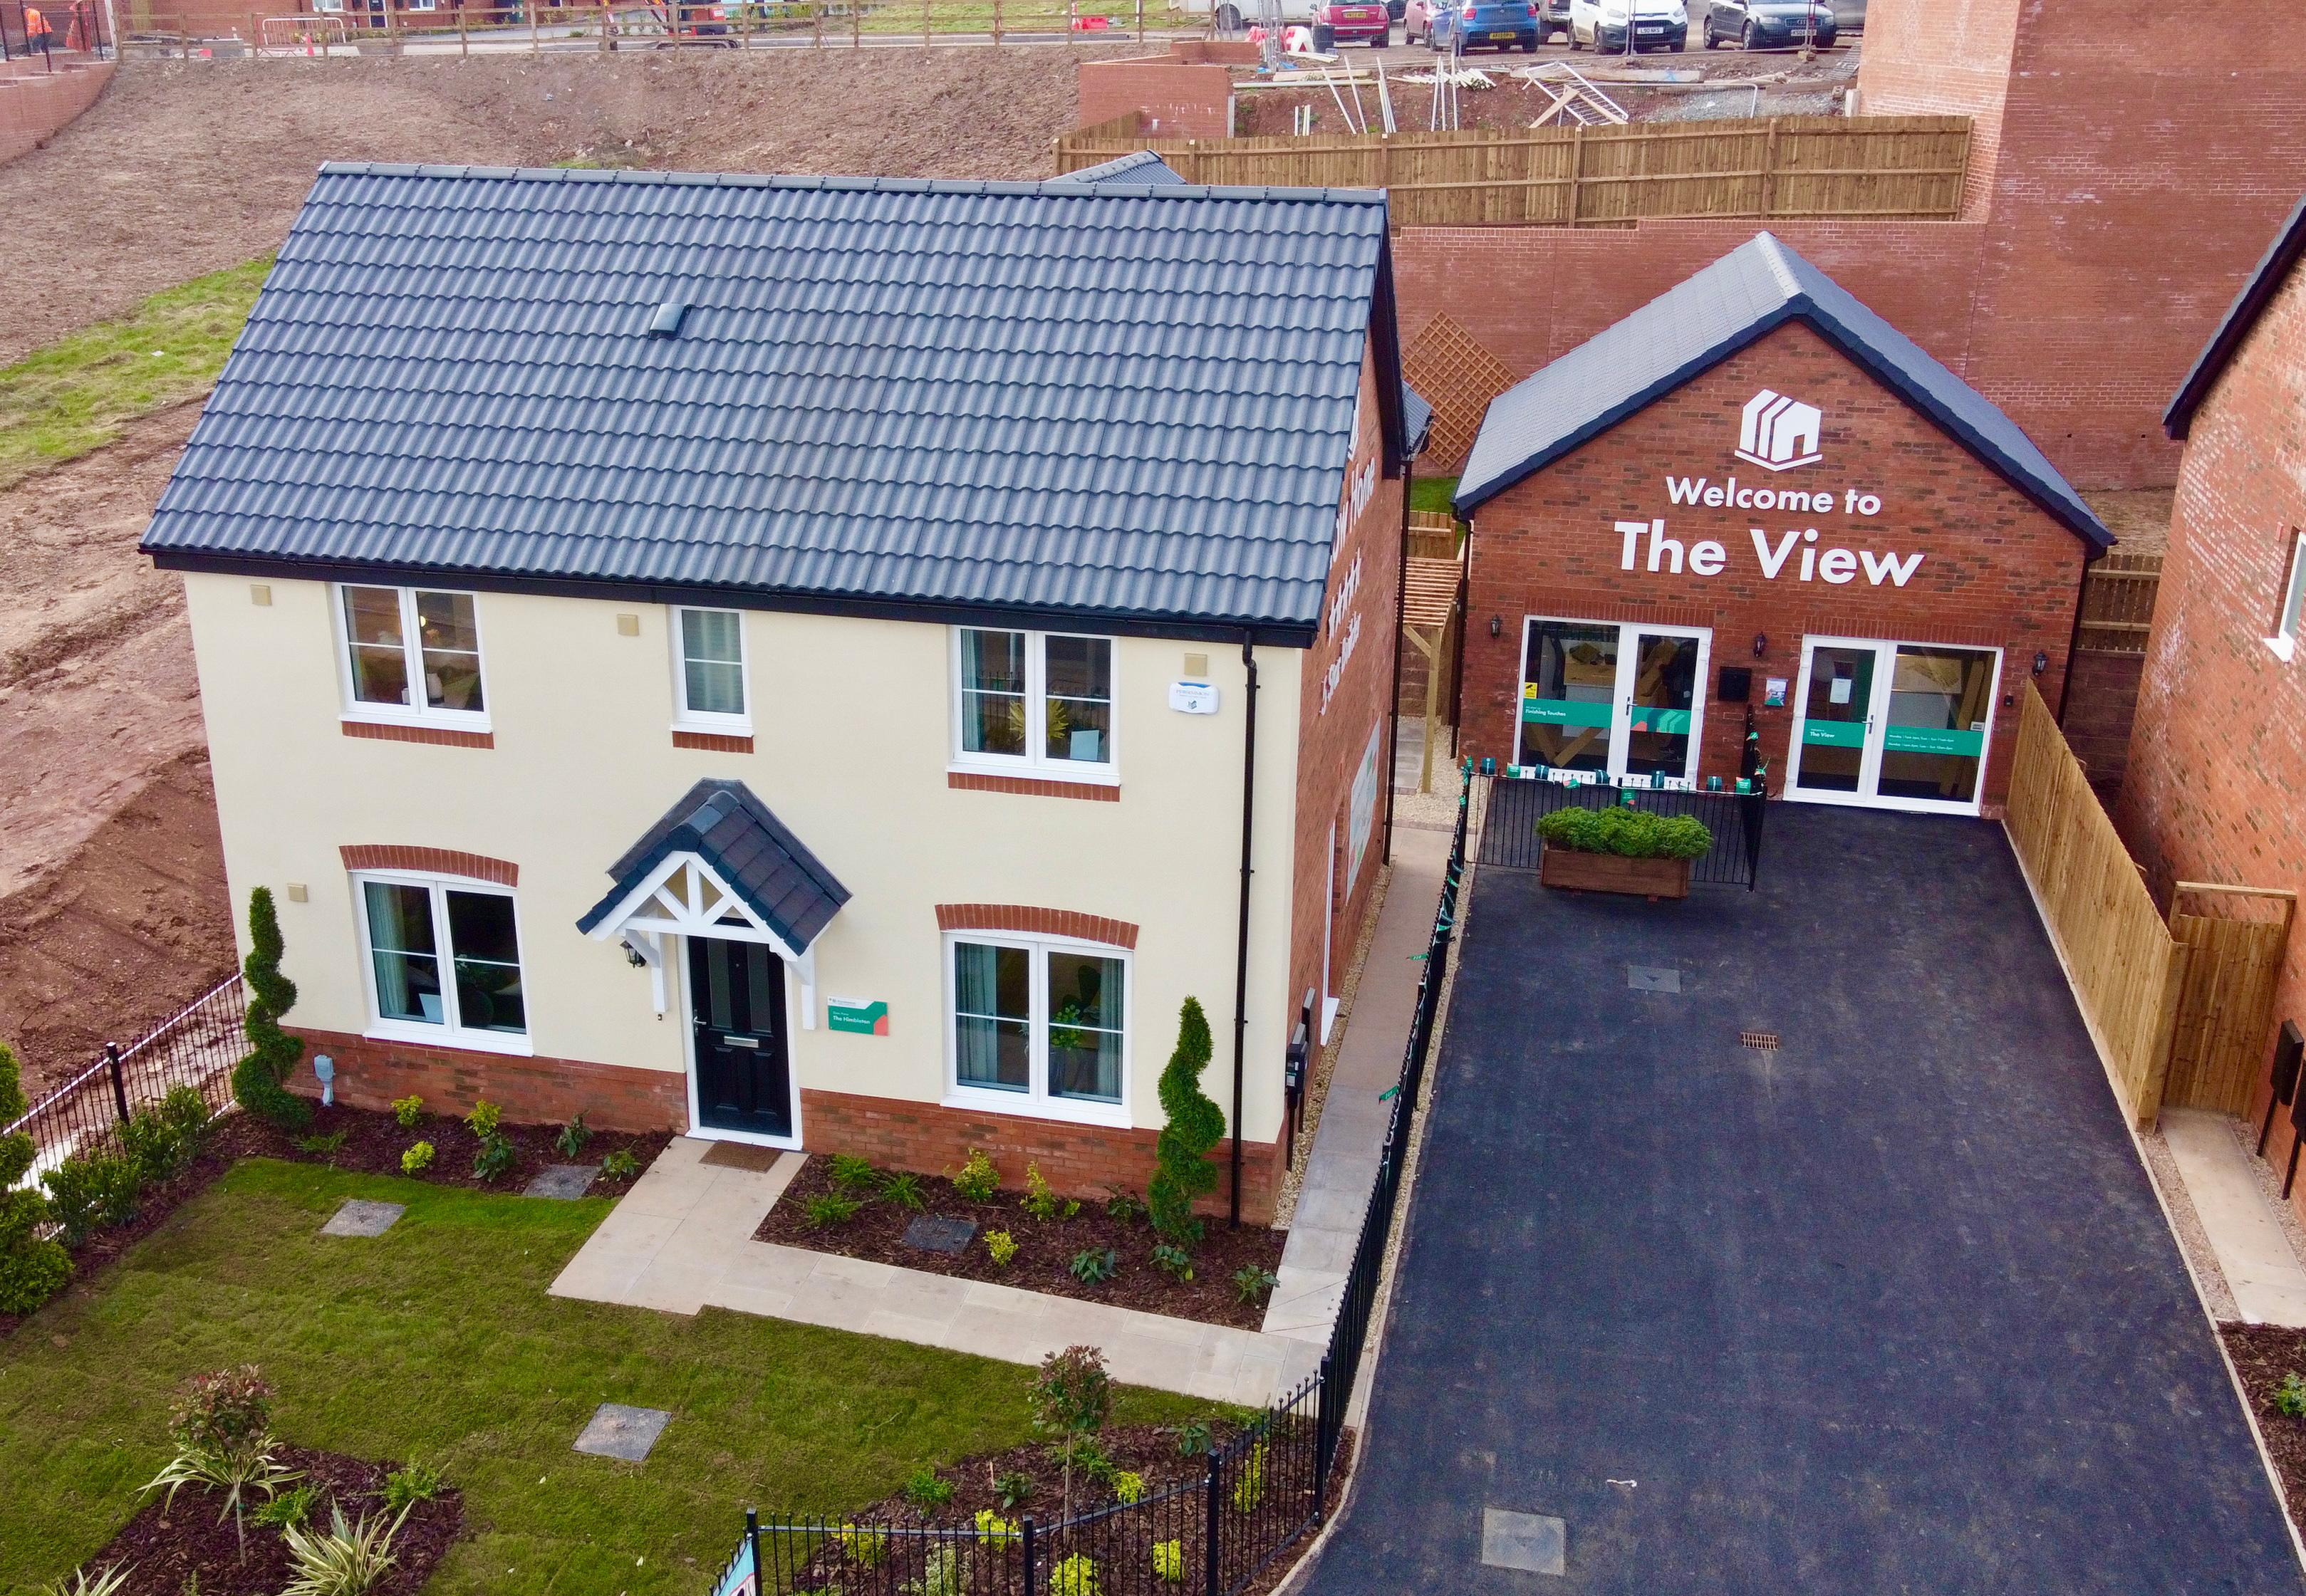 Images Persimmon Homes The View